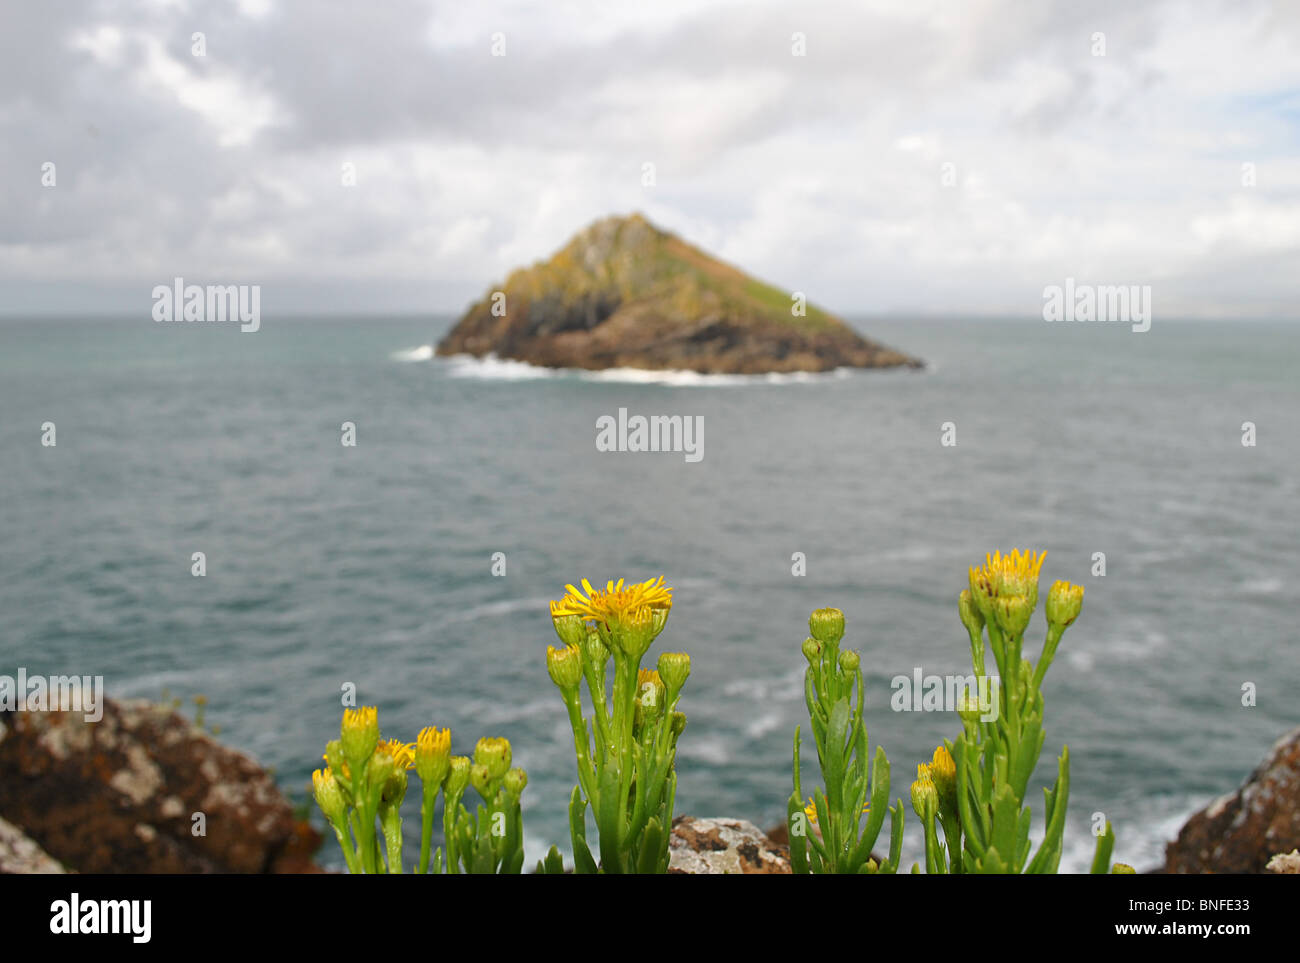 Yellow flowers growing on a rgged stretch of the Cornish coastline, England Stock Photo